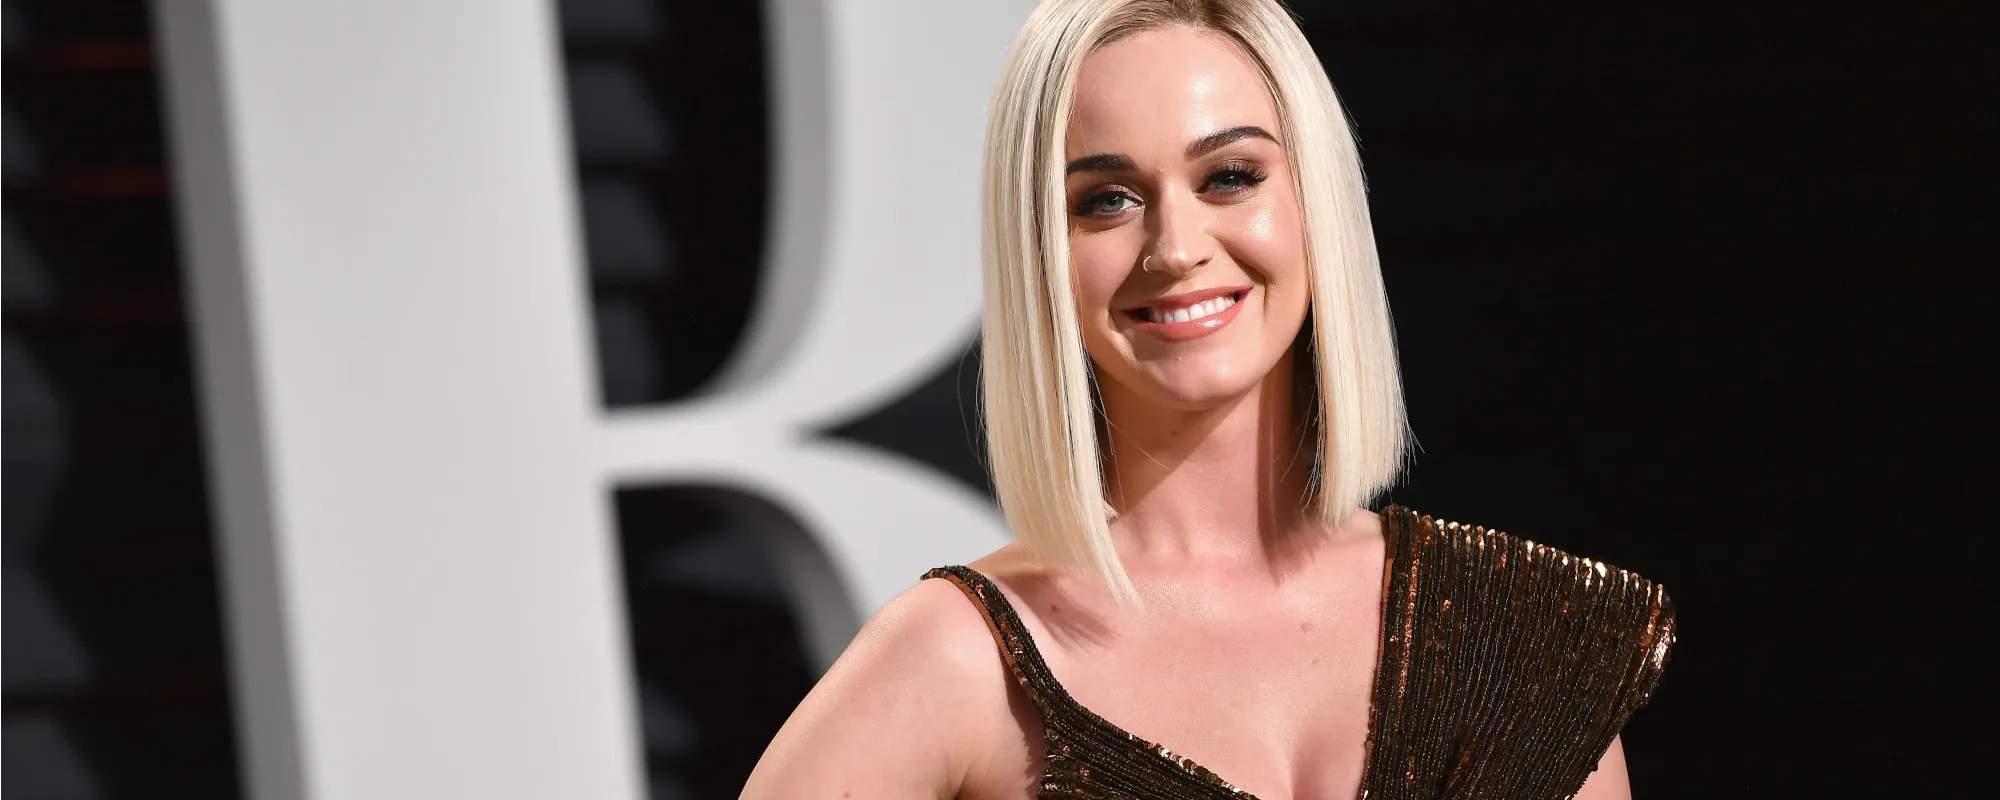 Behind the Meaning of Katy Perry’s Celebrity-Inspired “I Kissed A Girl”